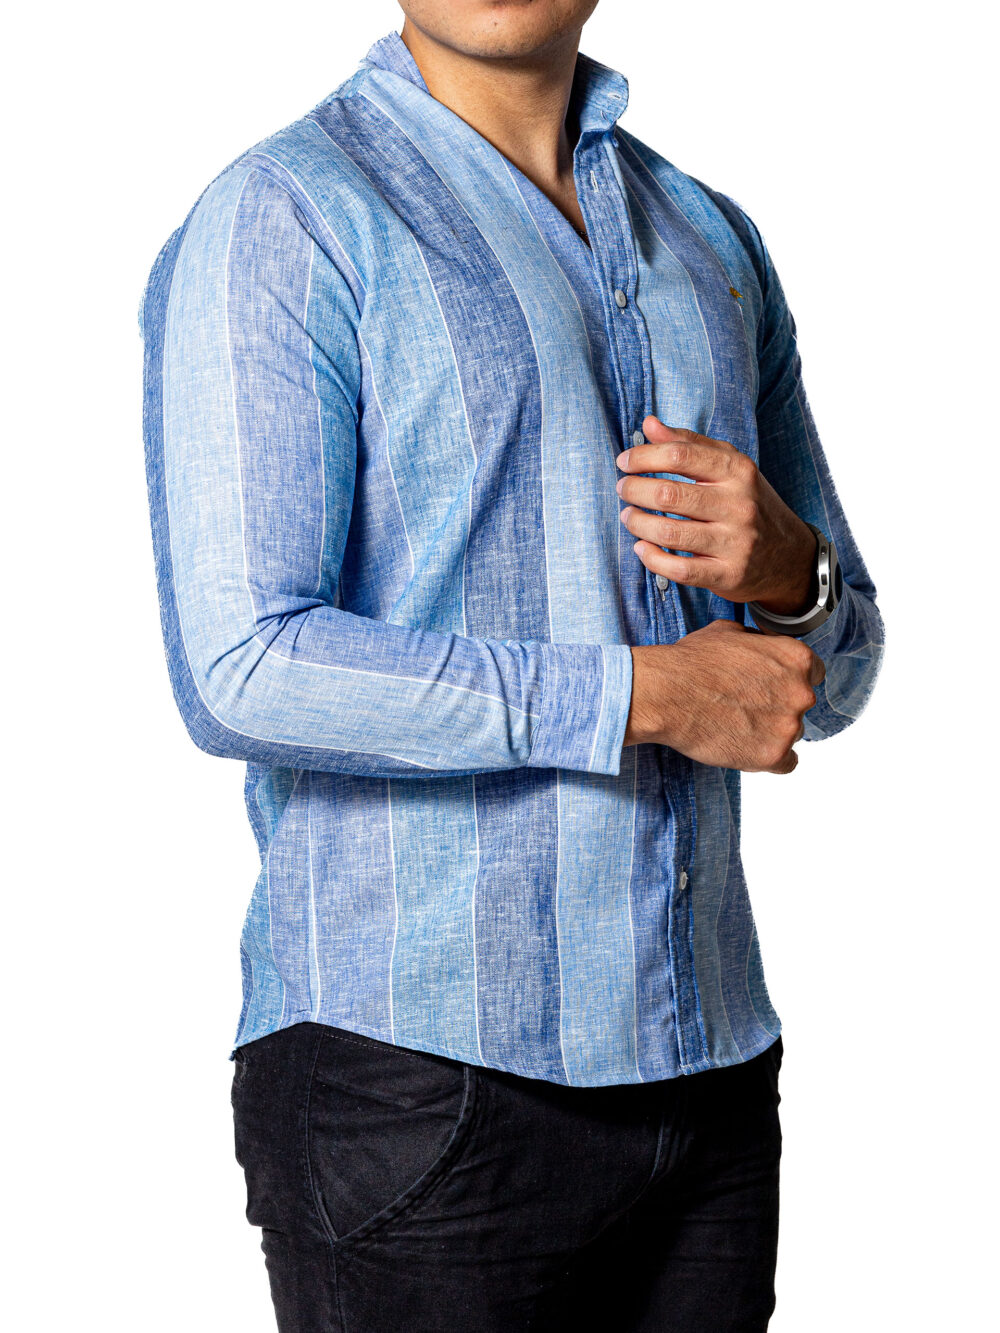 Camisa Hombre Casual Slim Fit Rayas Azules 3